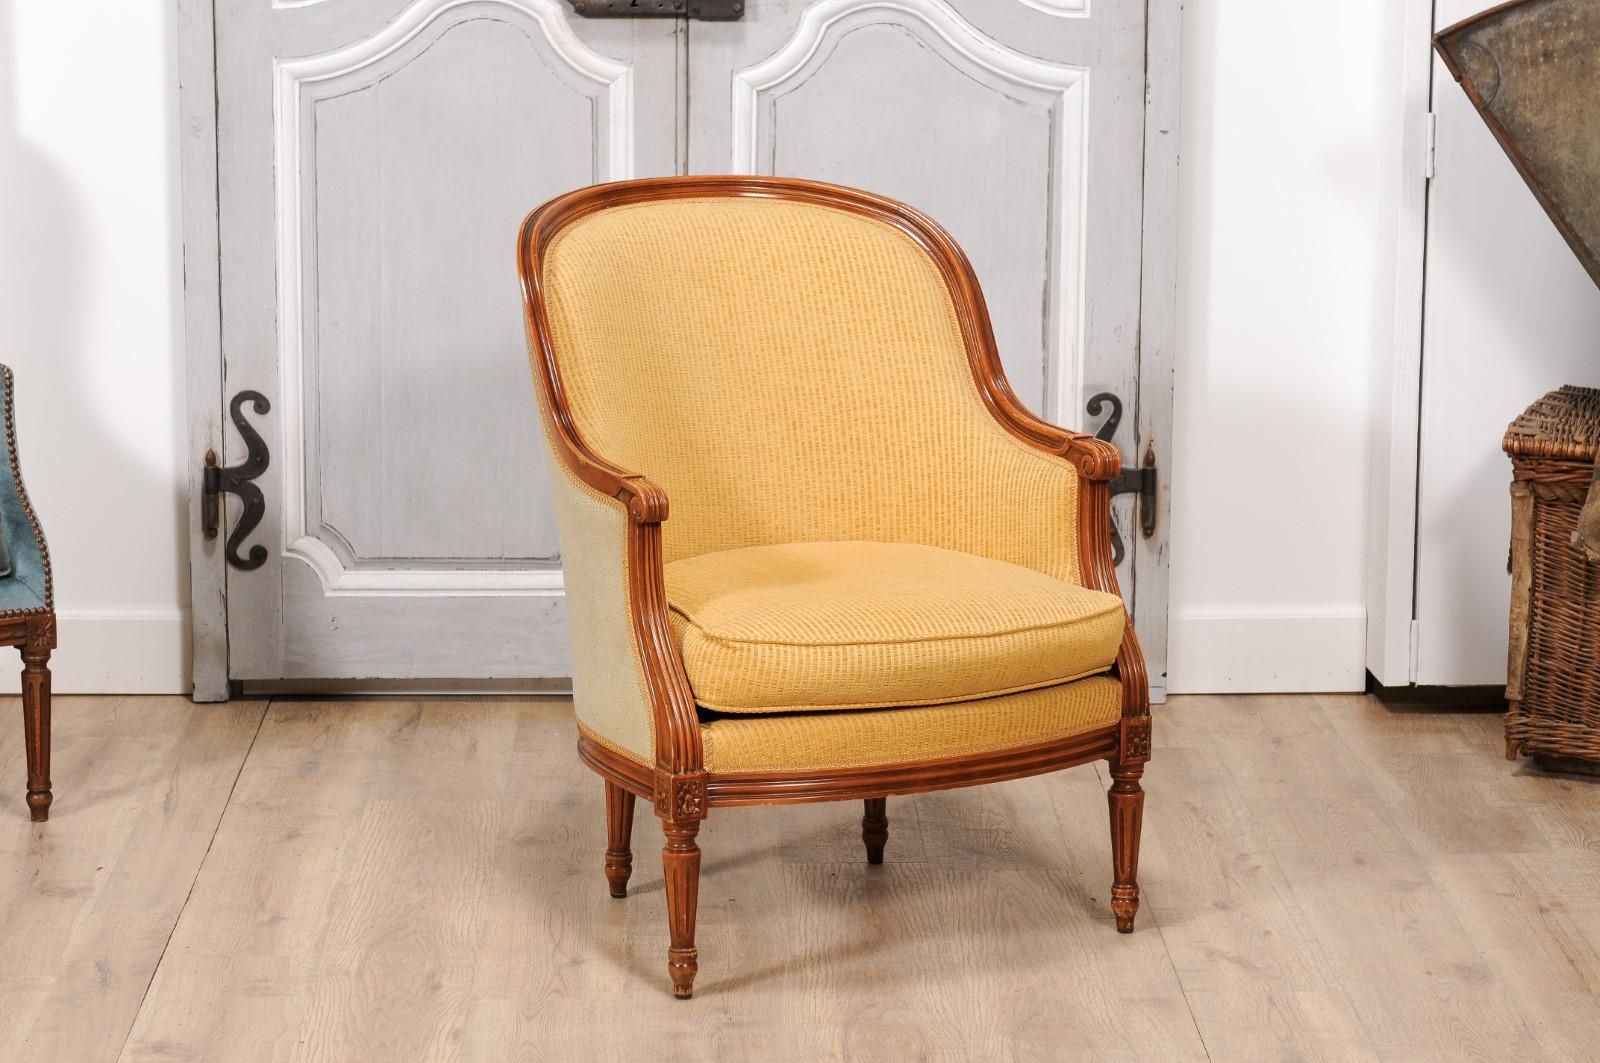 A pair of French Louis XVI style walnut bergères chairs from the 20th century with wraparound backs, scrolling knuckles on the arms, fluted legs and carved rosettes. Experience the grace and elegance of French craftsmanship with this exquisite pair